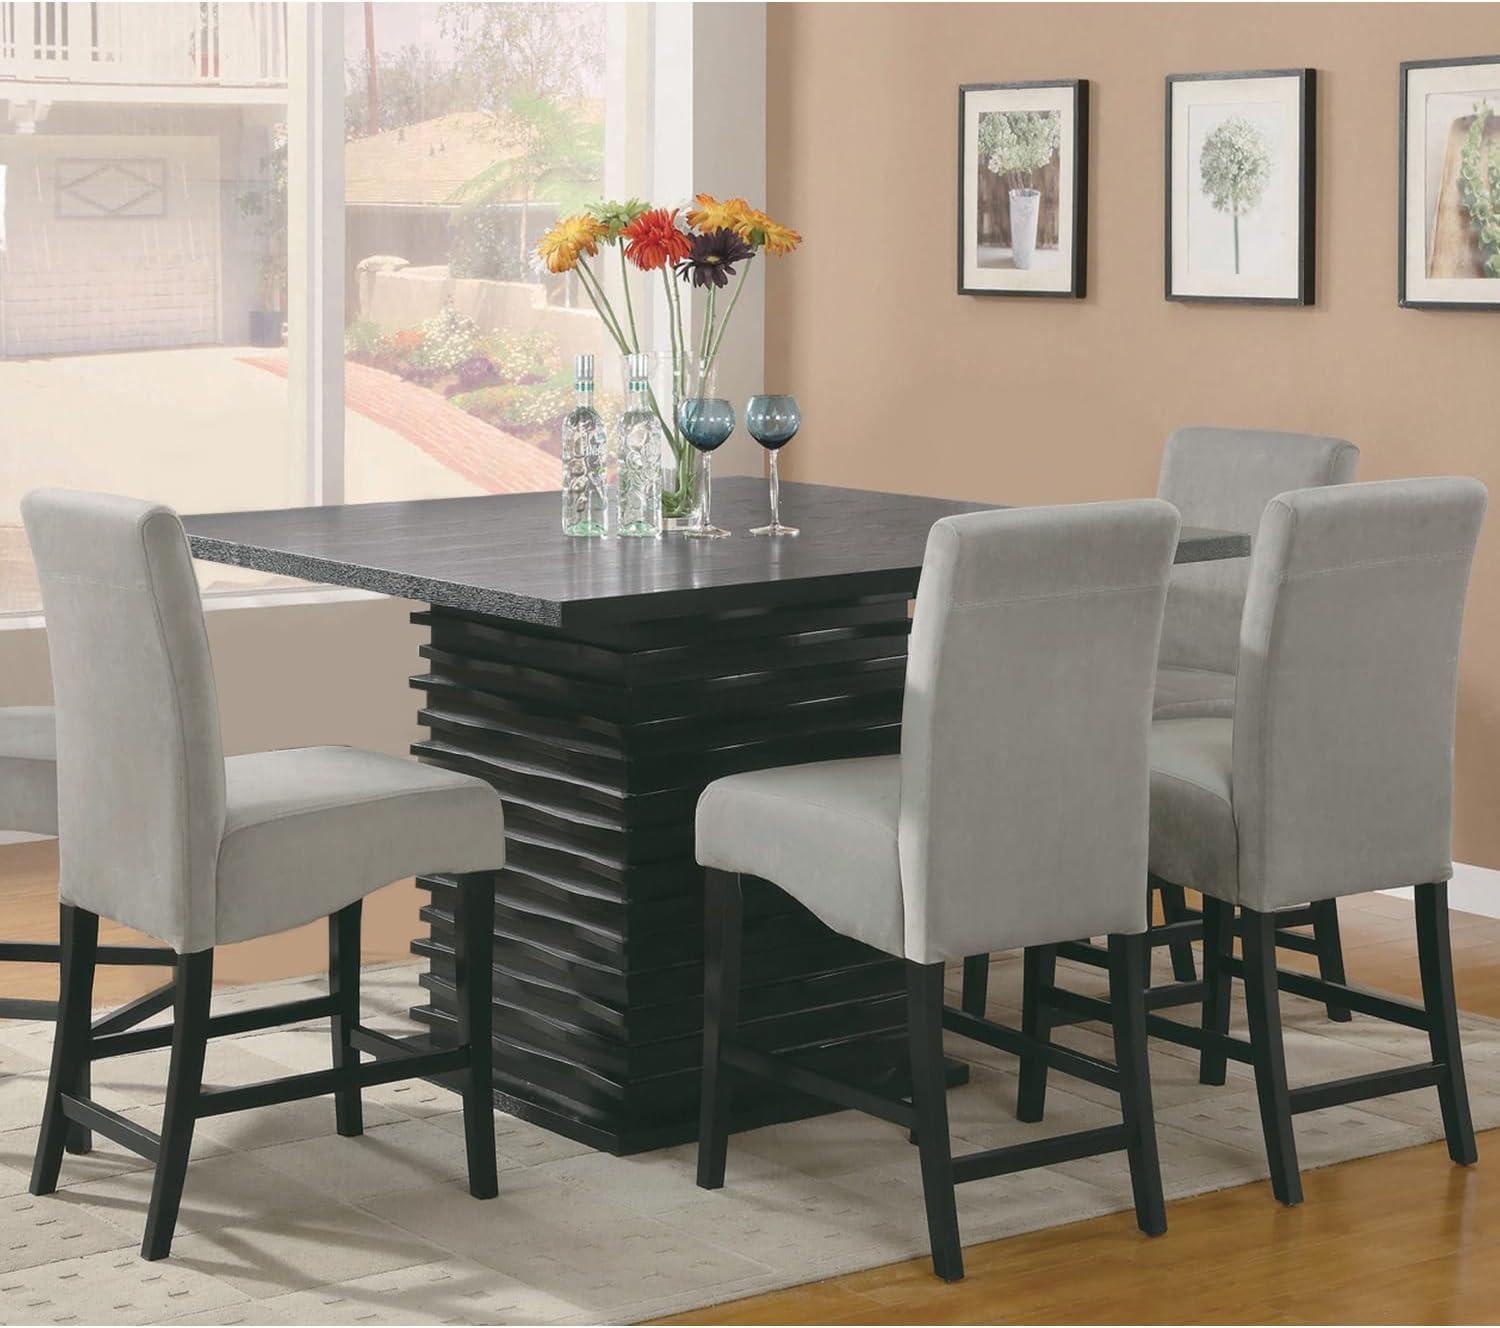 Ash Veneer 5-Piece Dining Set with Geometric Base in Black and Grey